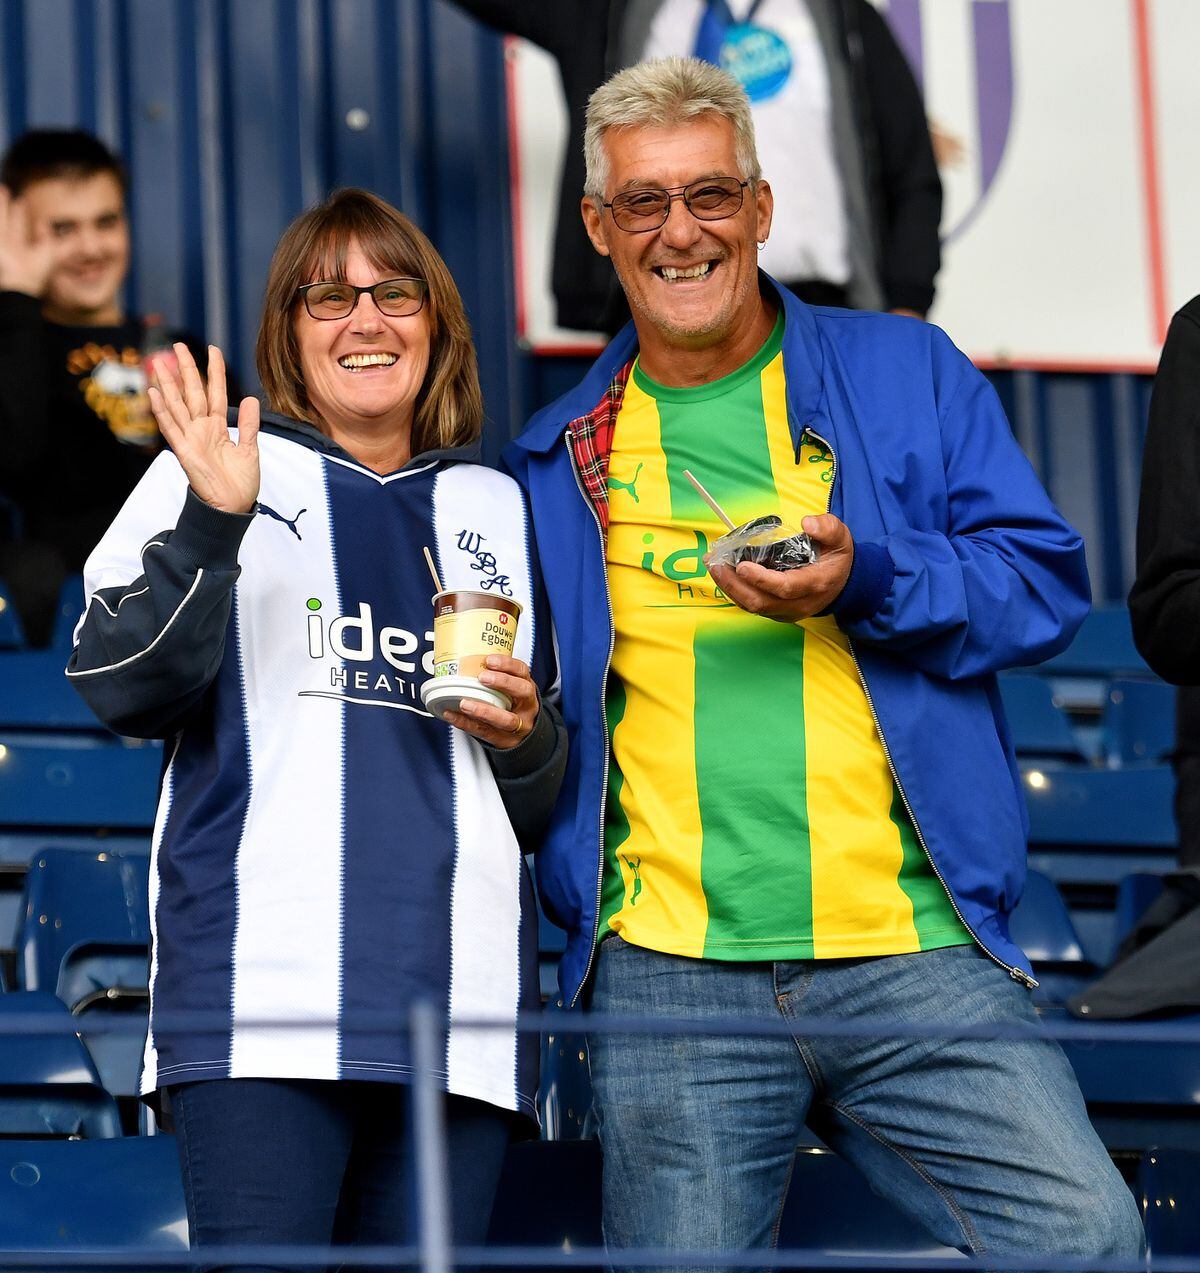 Baggies fans ahead of the Clash of the Legends match